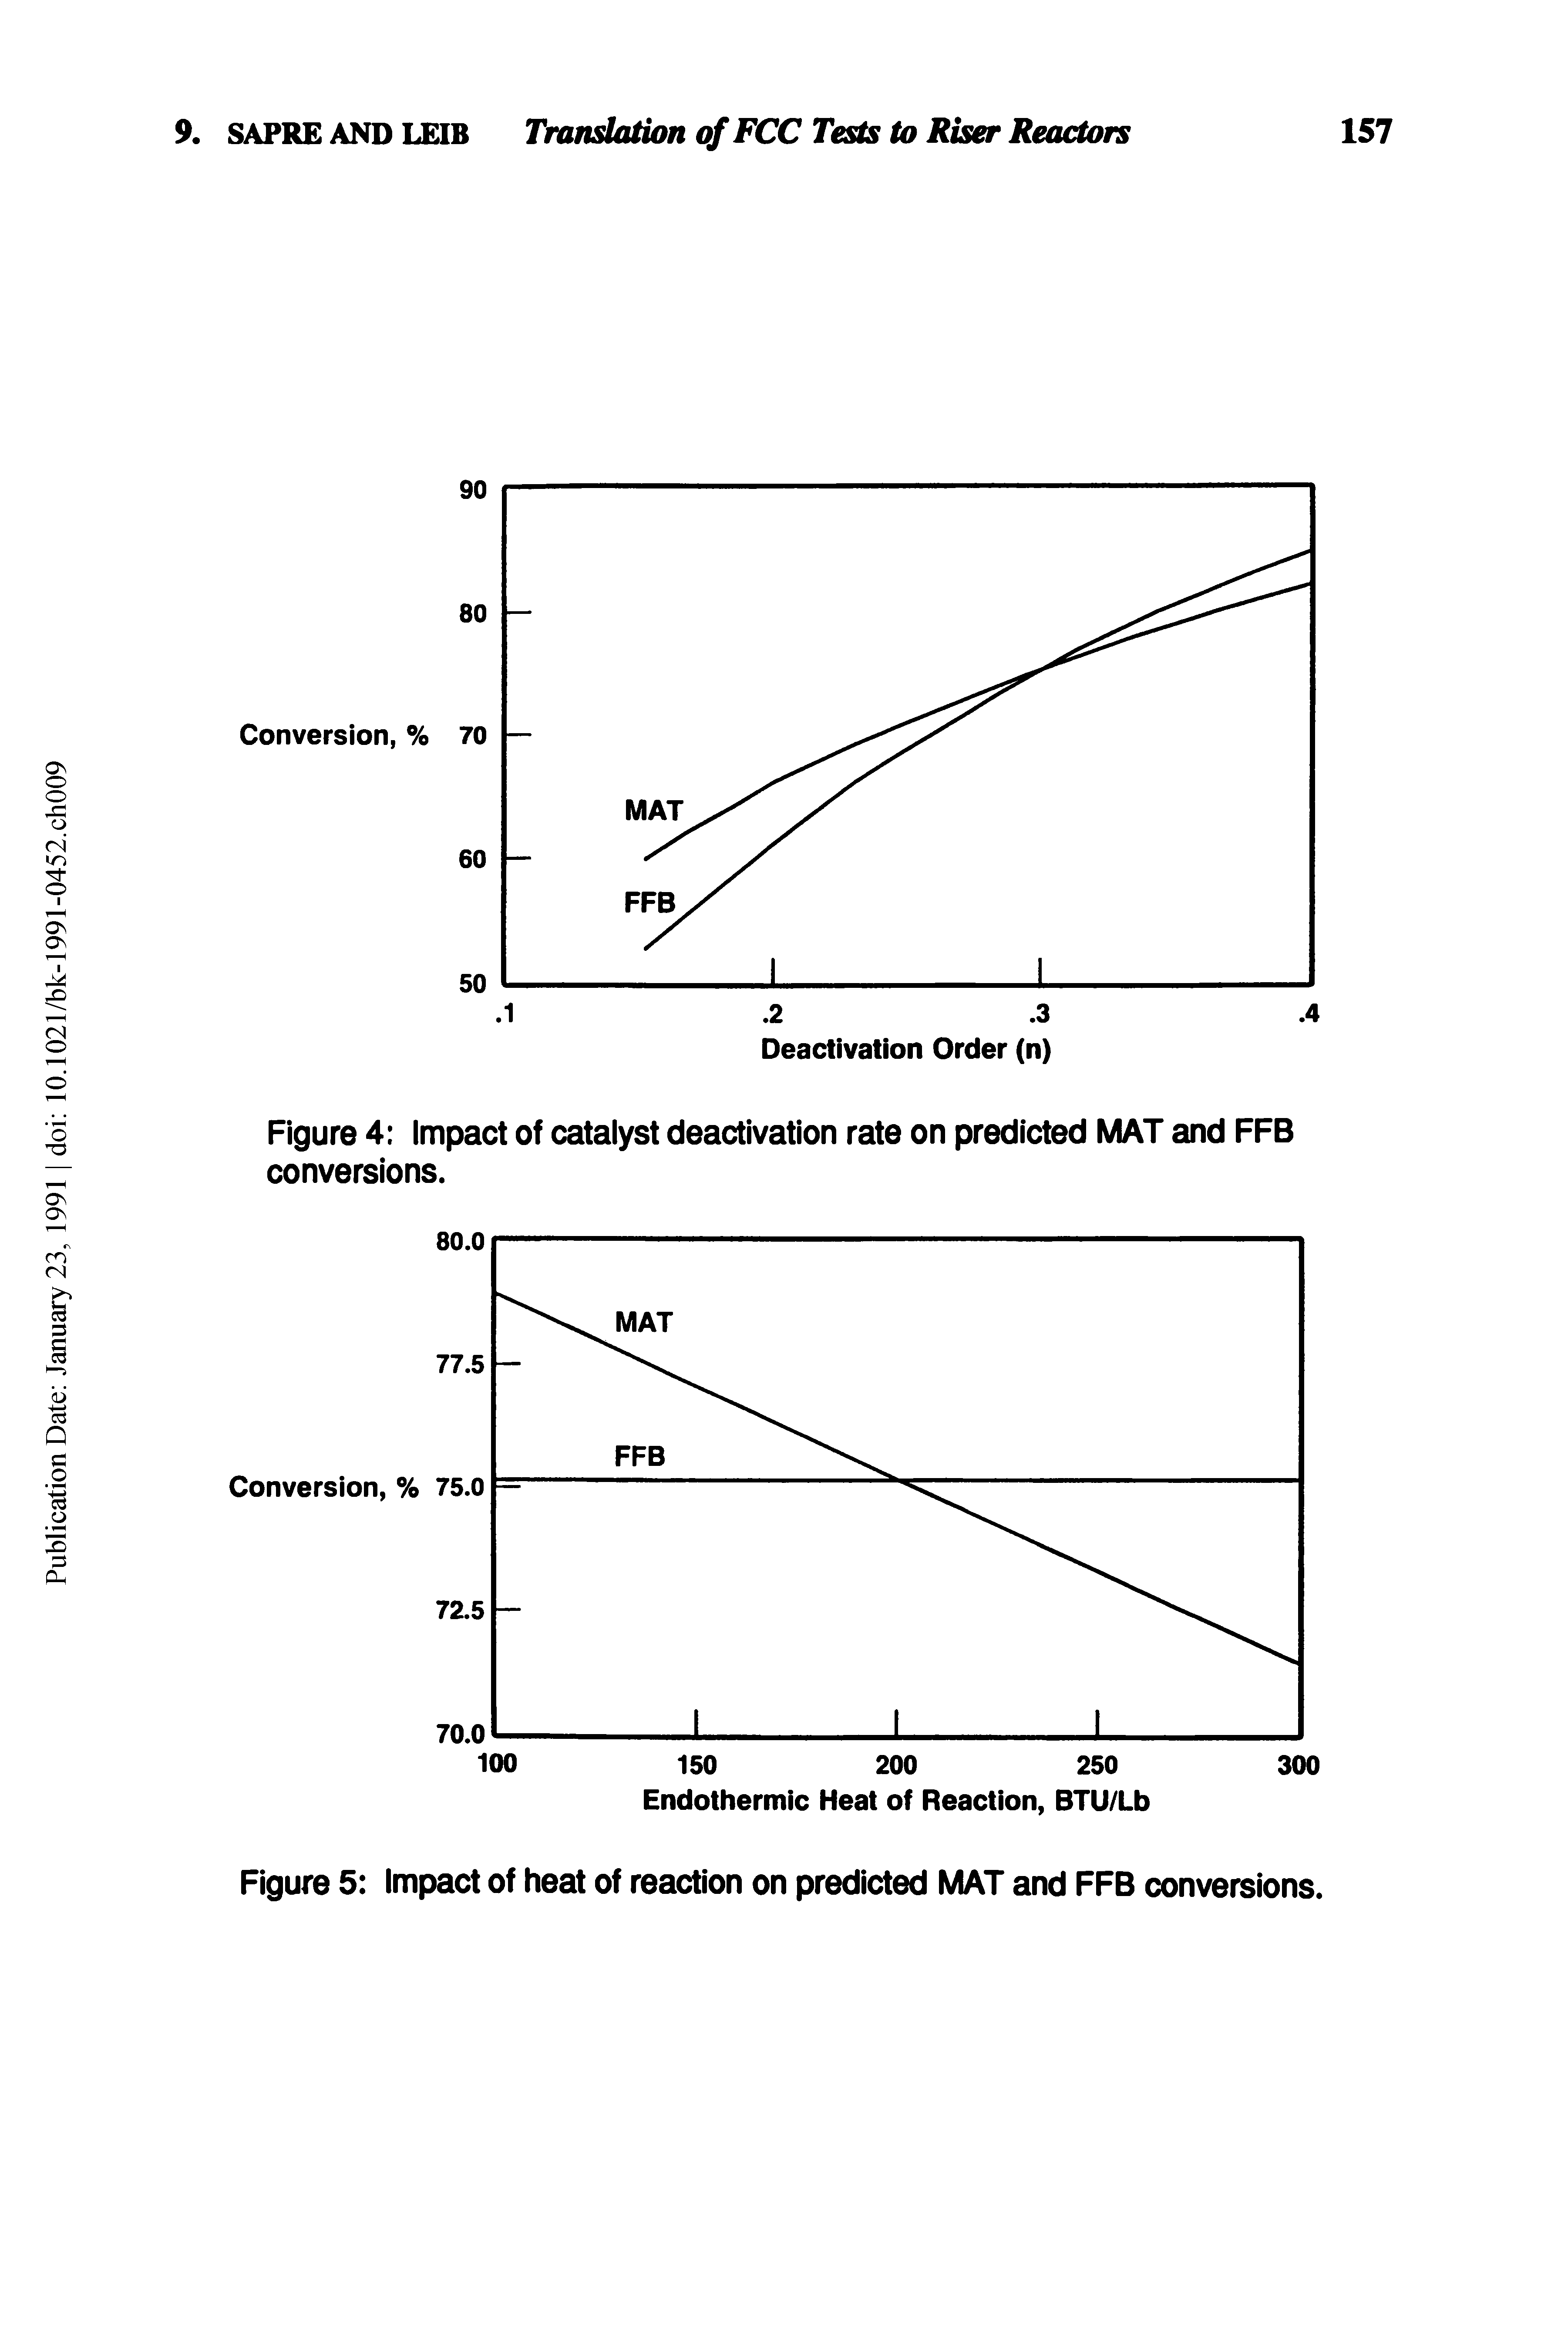 Figure 4 Impact of catalyst deactivation rate on predicted MAT and FFB conversions.